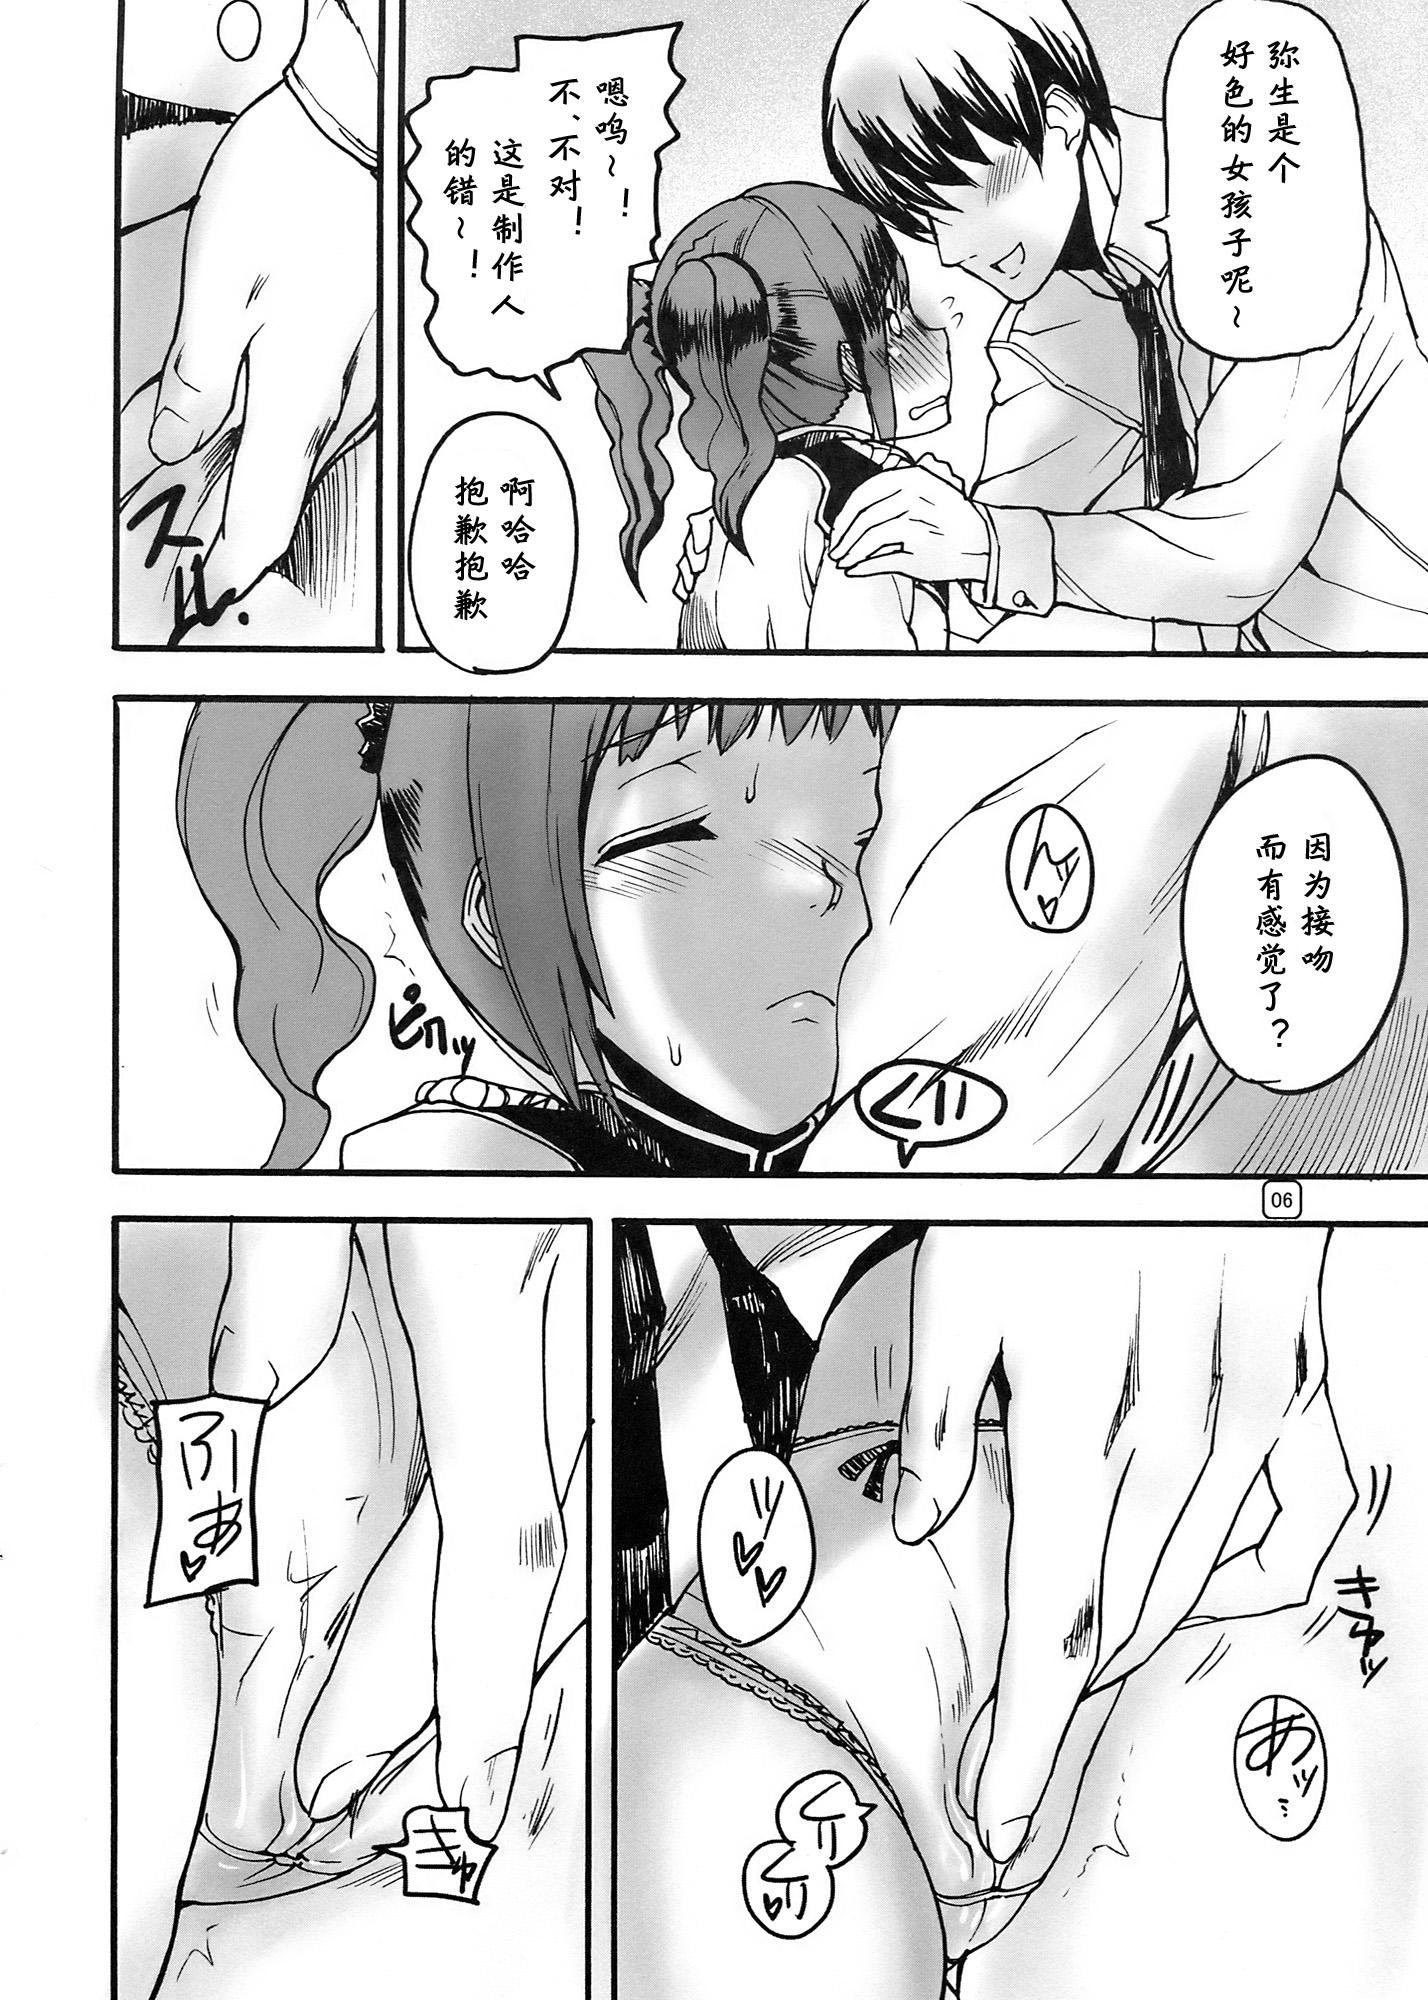 Friend GO 841 WAY!!! - The idolmaster Salope - Page 5